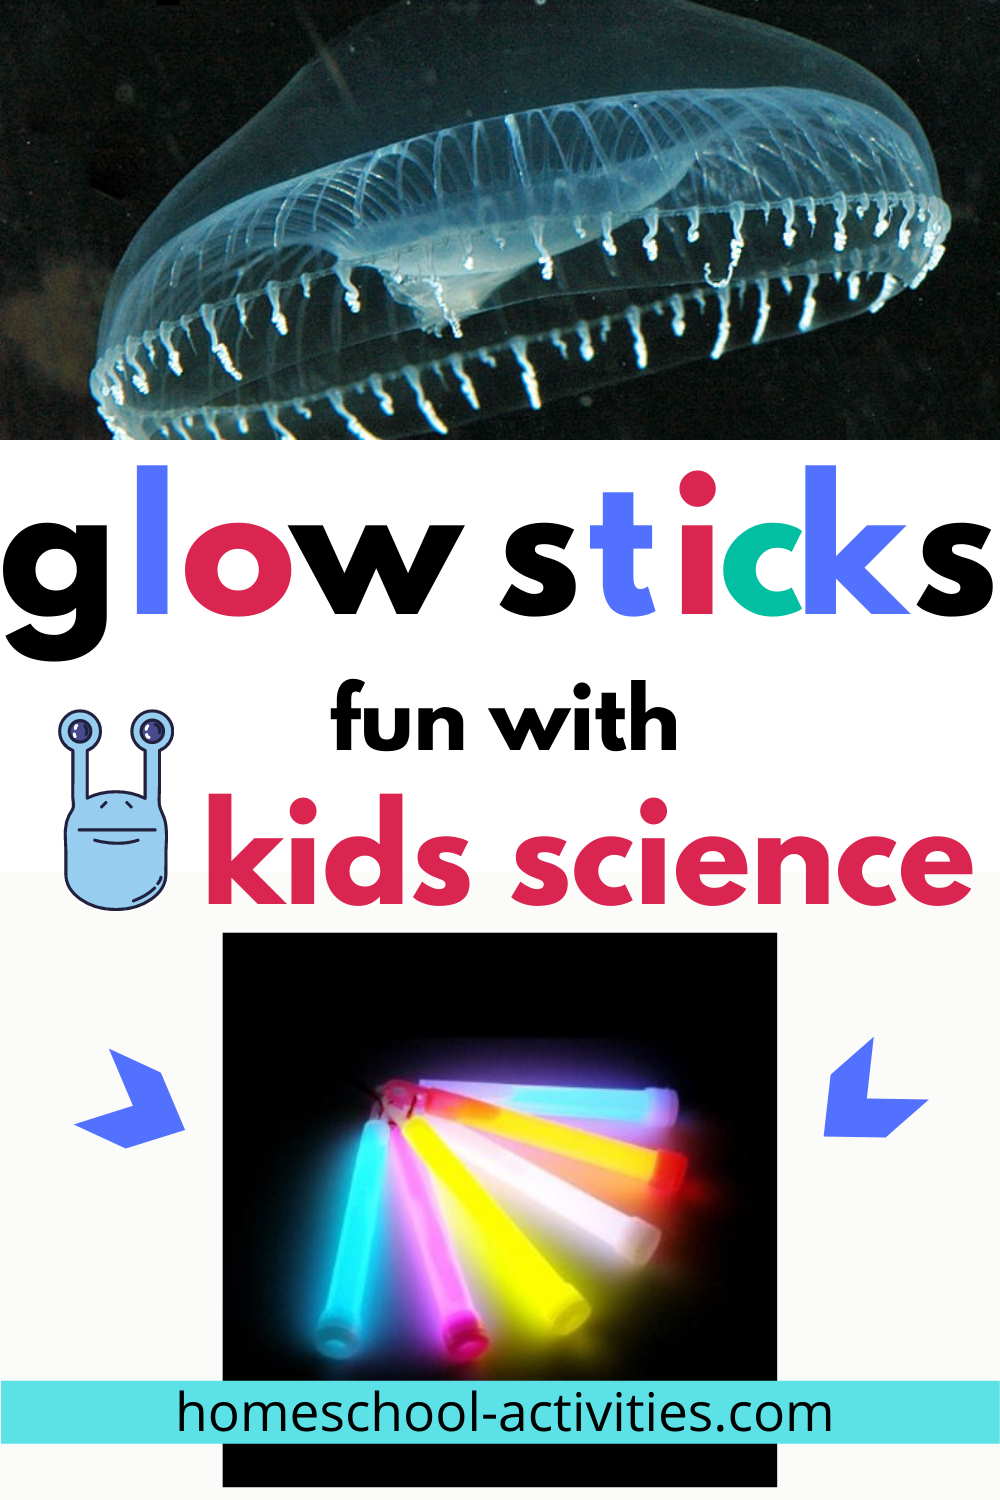 Kids science experiments with glow sticks